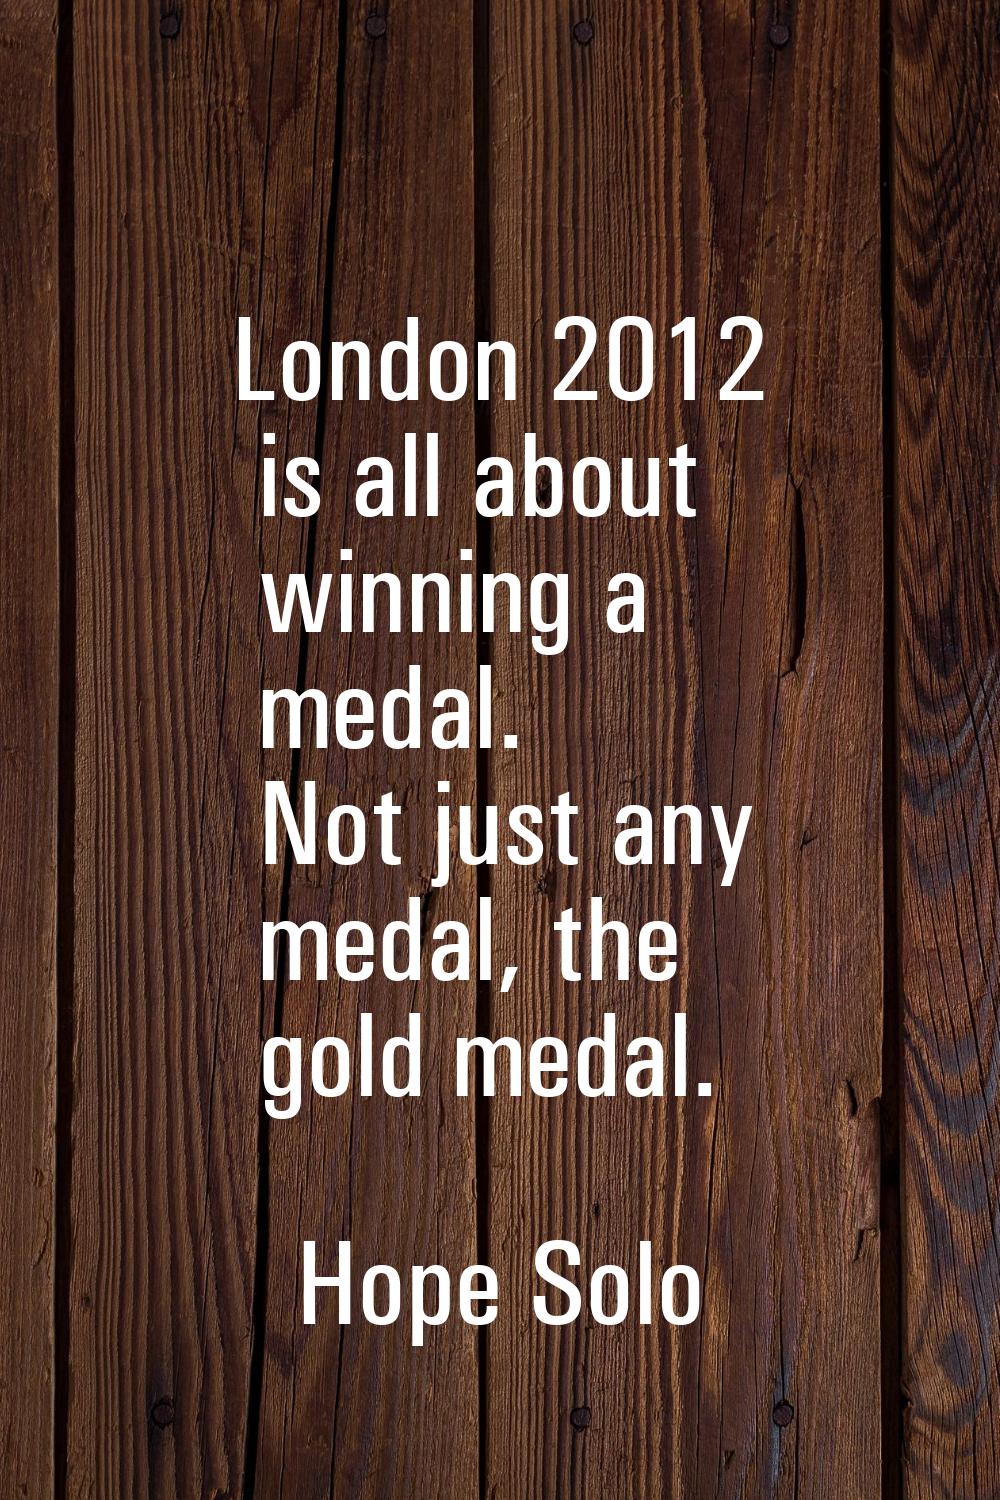 London 2012 is all about winning a medal. Not just any medal, the gold medal.